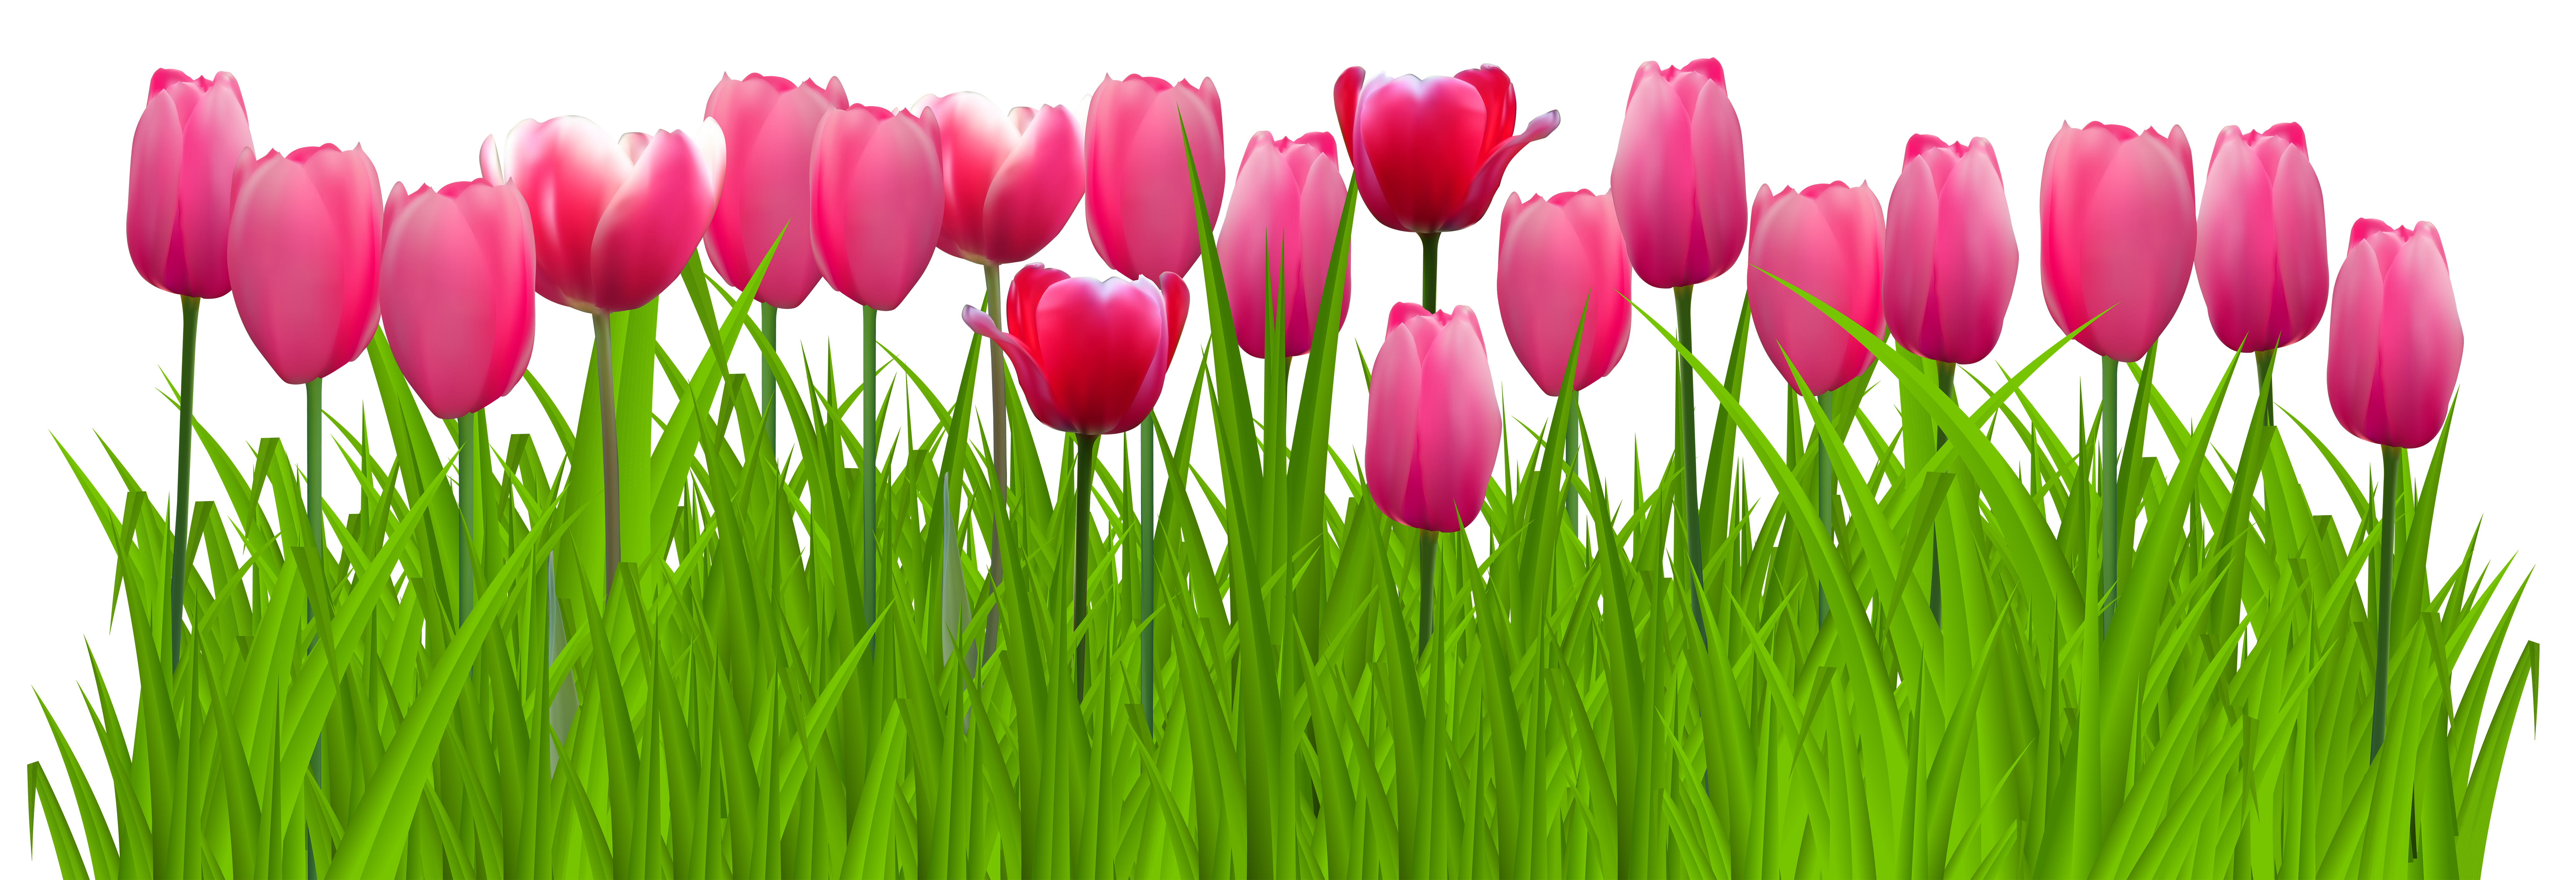 Tulips Clipart Images.